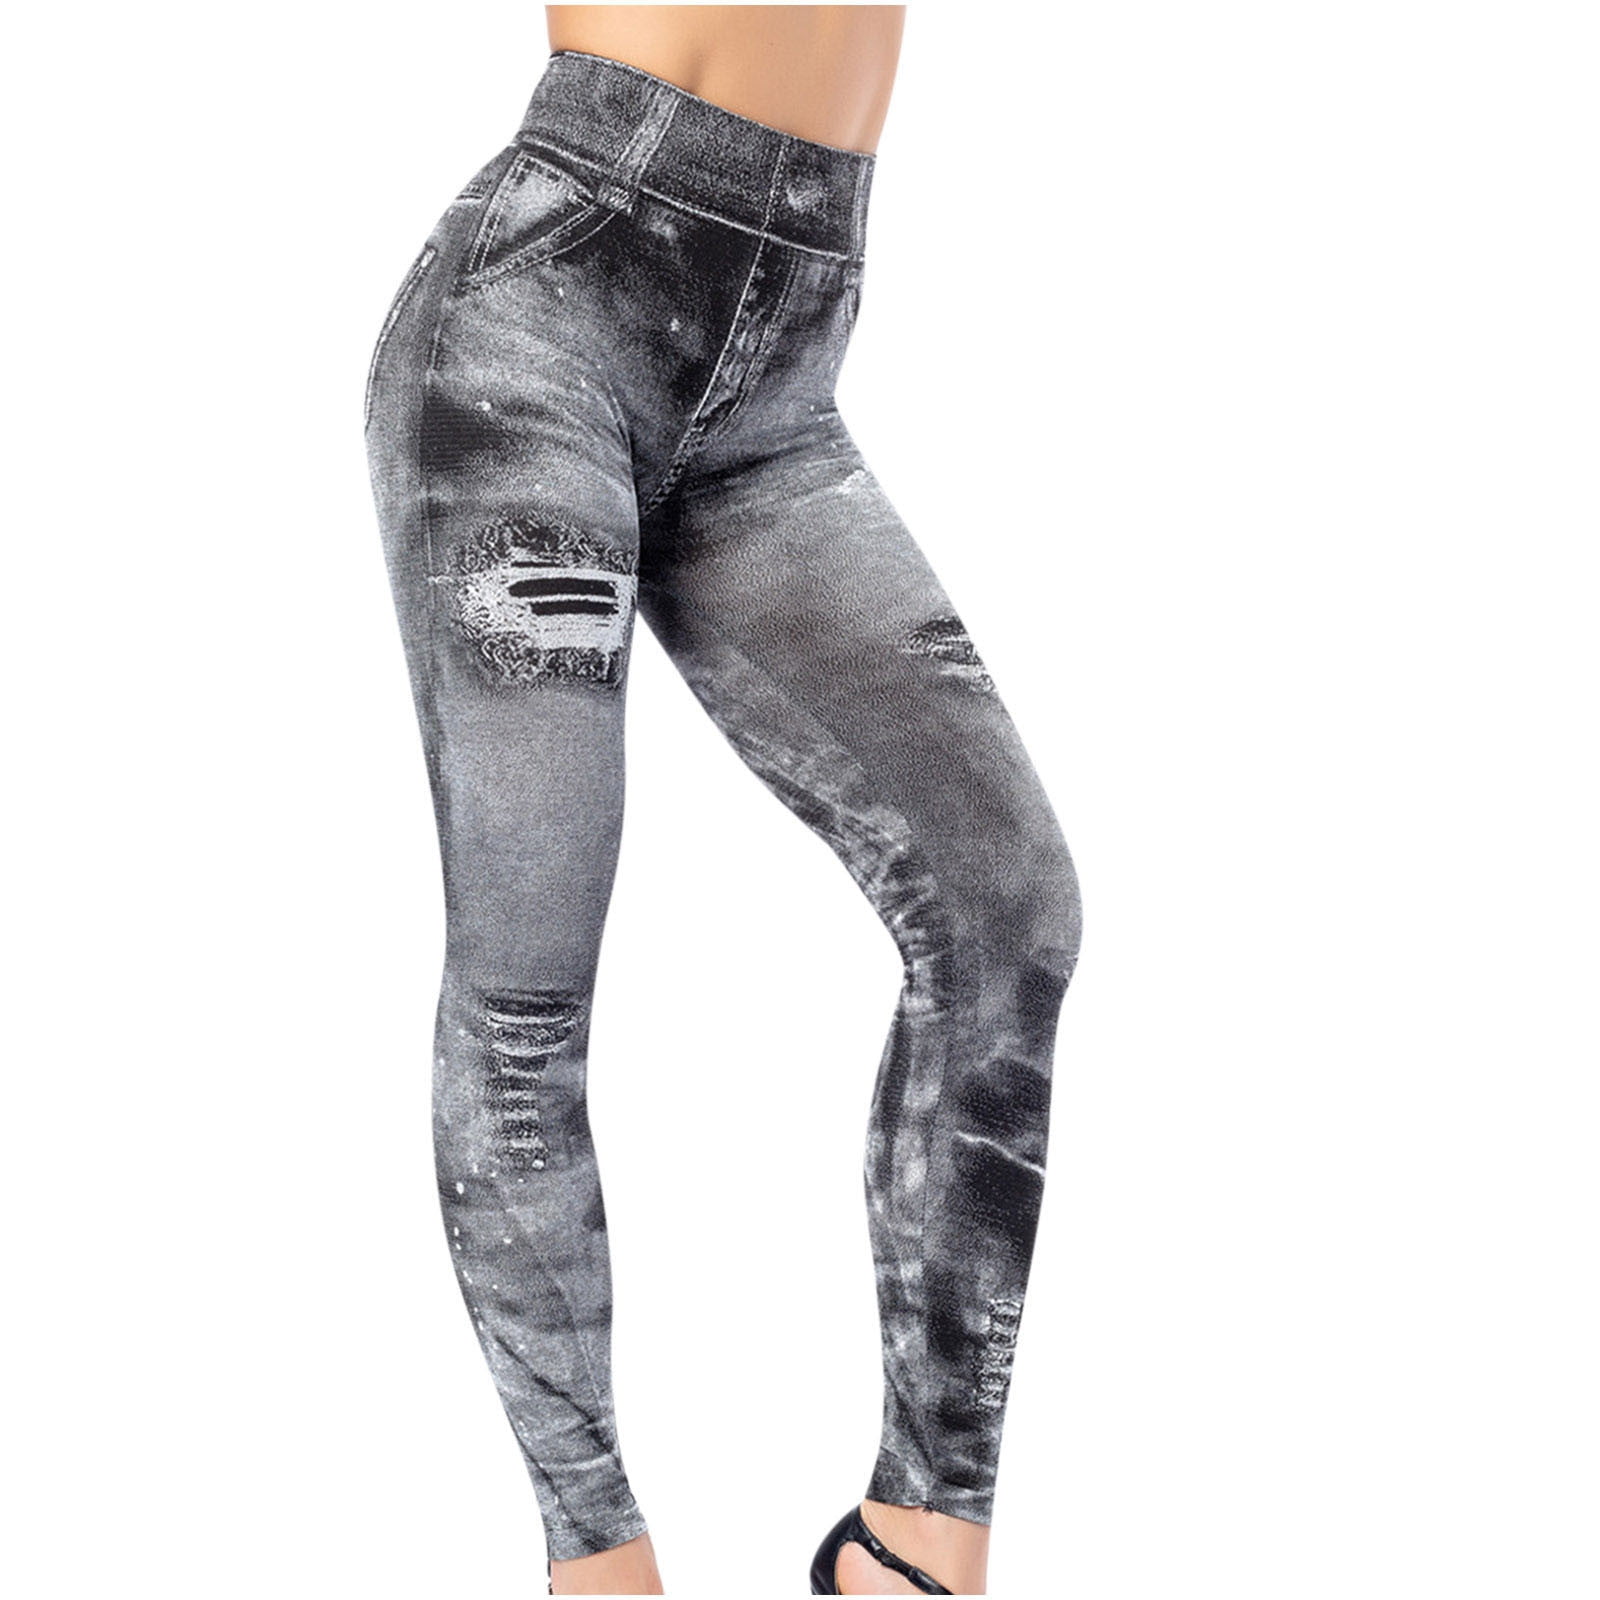 YYDGH Leggings for Women Distressed Ripped Denim Jeggings High Waist Tummy  Control Yoga Pants Stretchy Skinny Jeans Tights Navy Blue M 